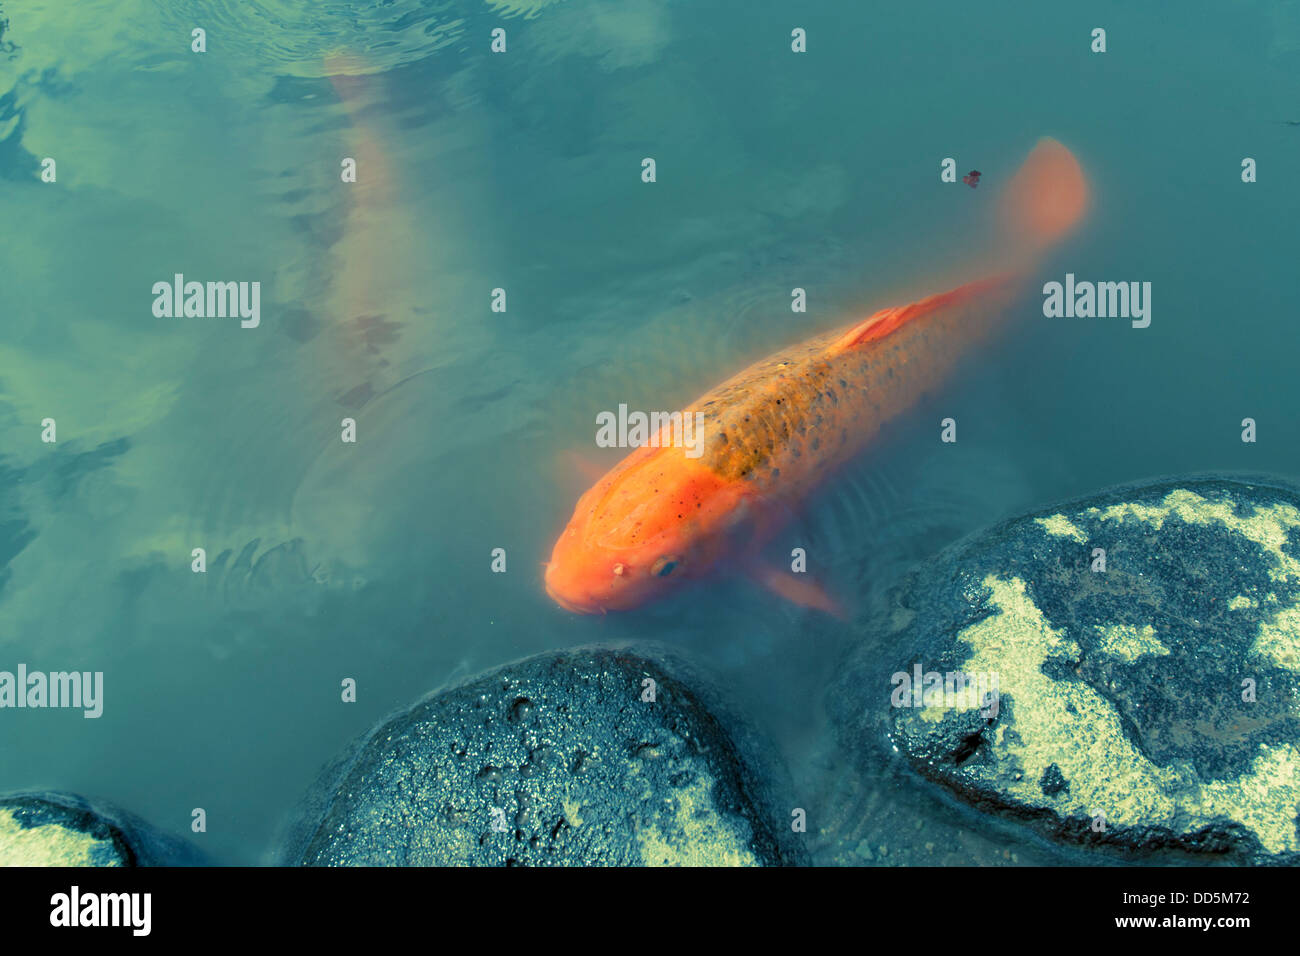 red koi fish close to stone steps in Japanese pond Stock Photo